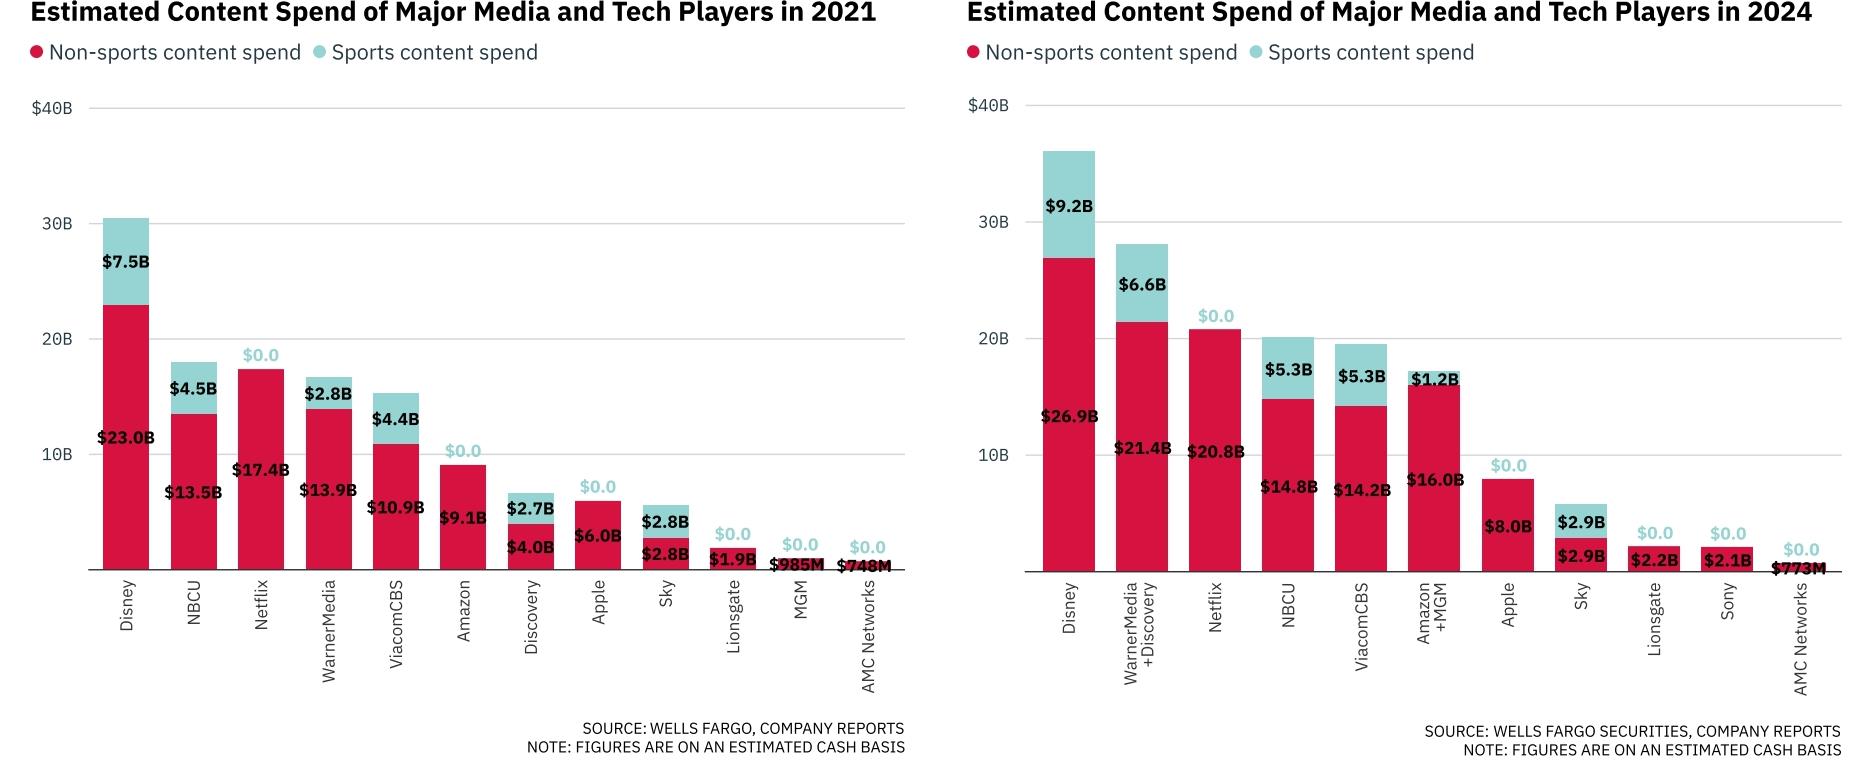 estimated content spend of major media and tech players 2021-2024